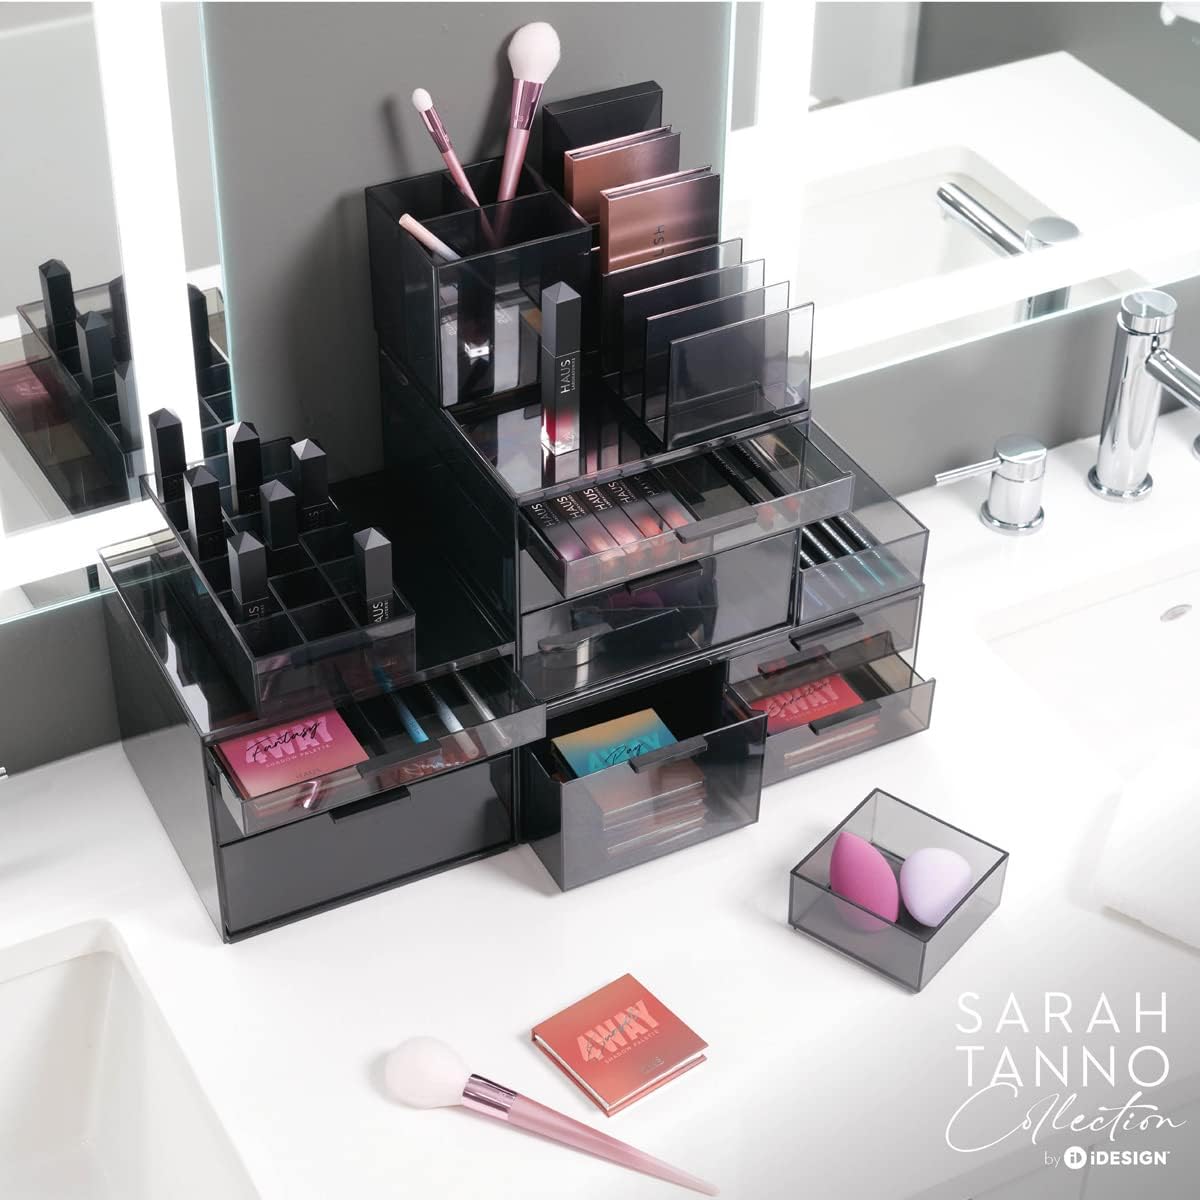 SPECIAL iDesign by Sarah Tanno Paletten Make-up Organizer